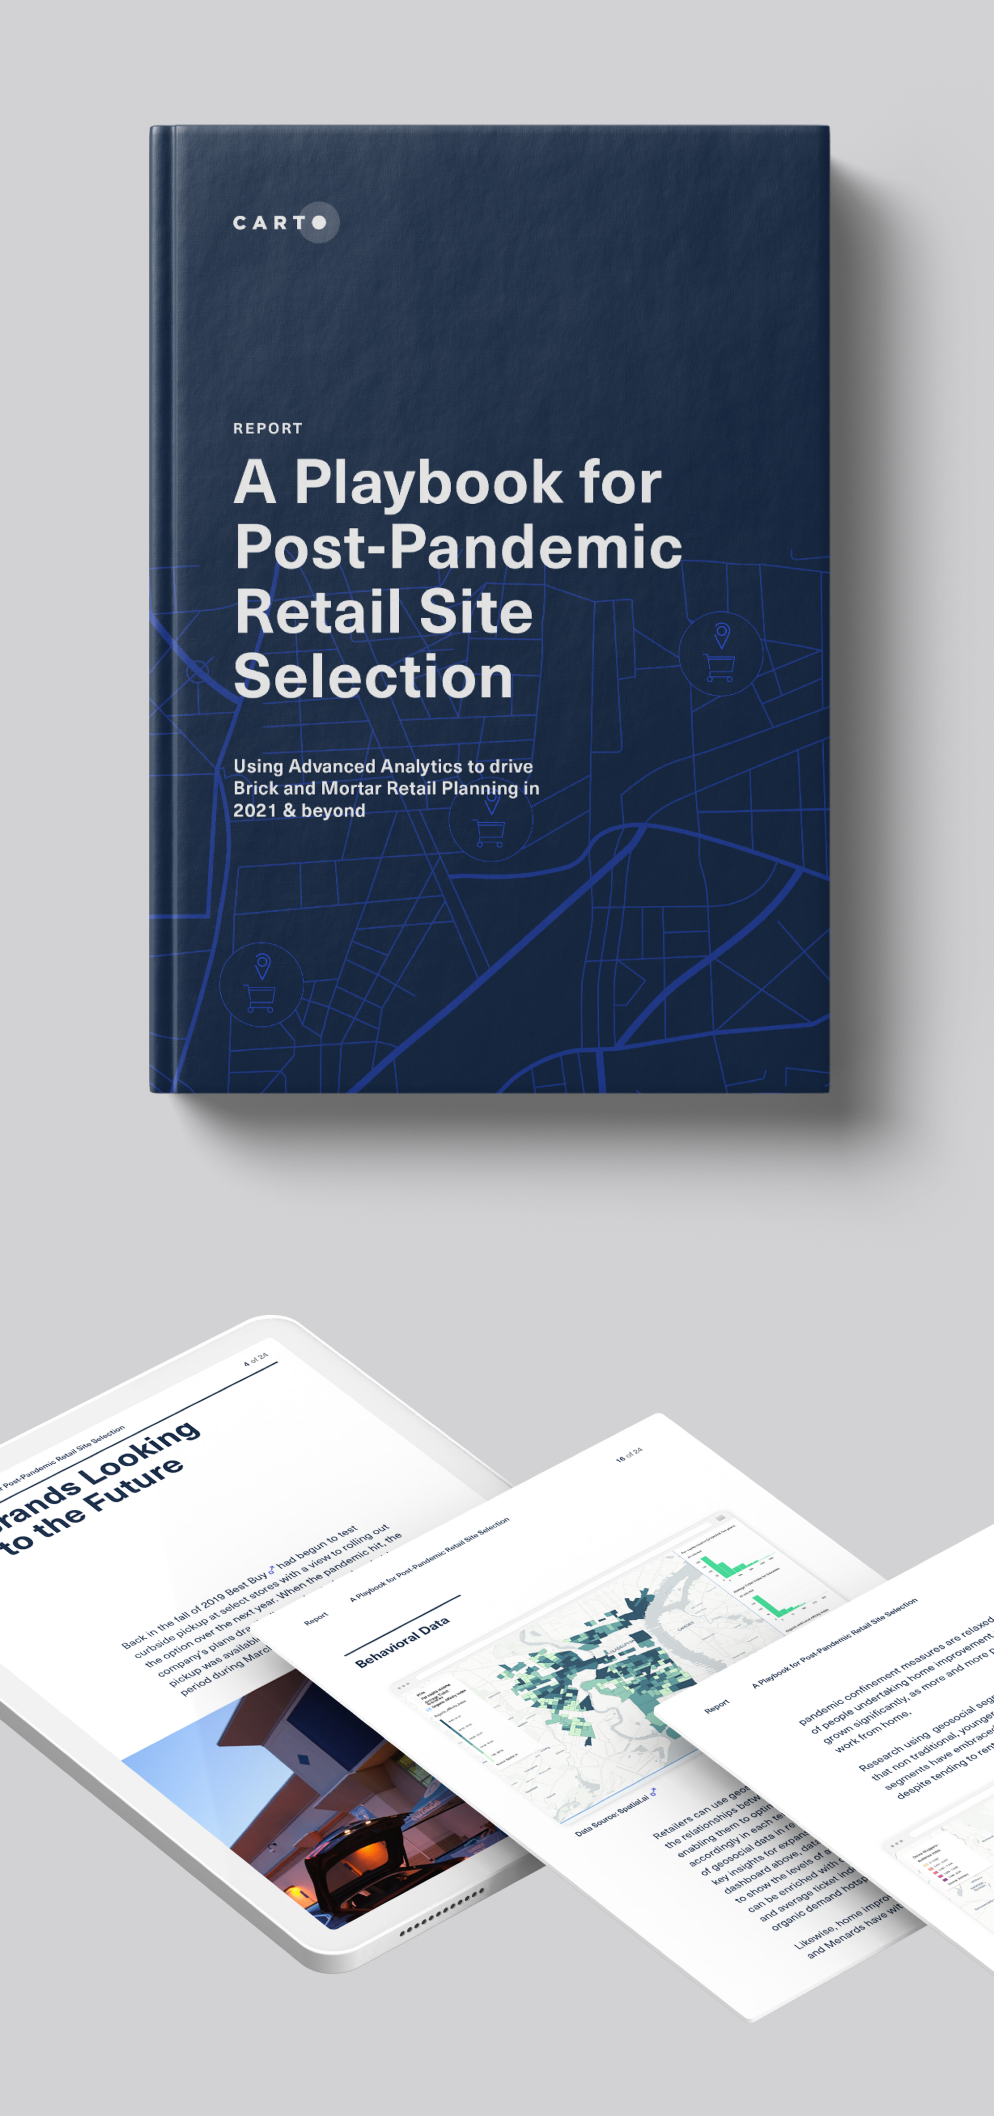 A Playbook for Post-Pandemic Retail Site Selection